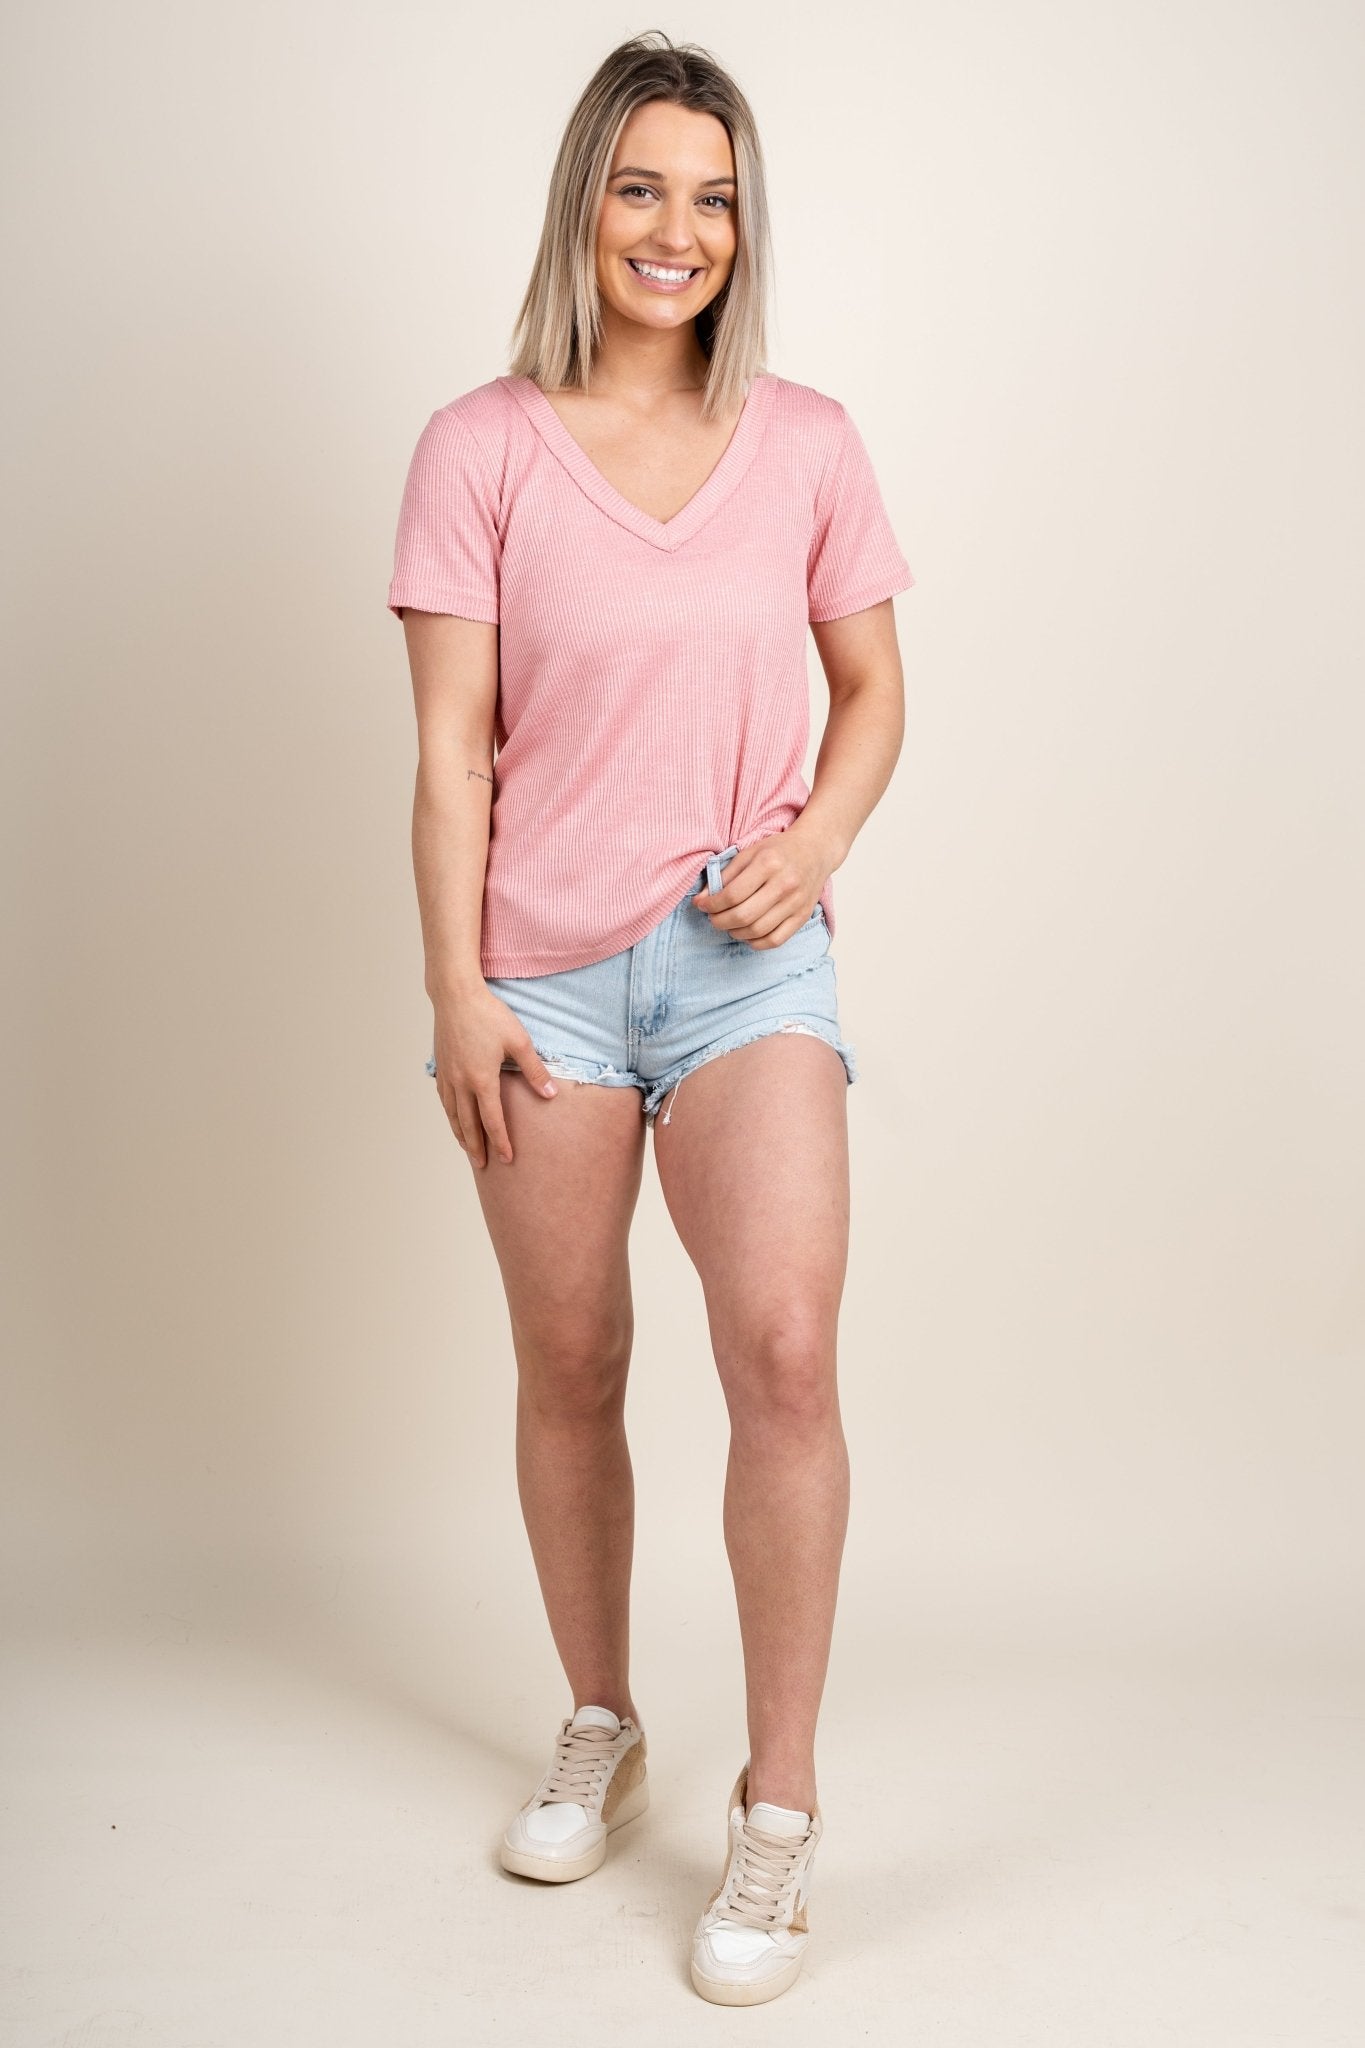 Z Supply Dana ribbed haci short sleeve top guava - Z Supply Top - Z Supply Clothing at Lush Fashion Lounge Trendy Boutique Oklahoma City